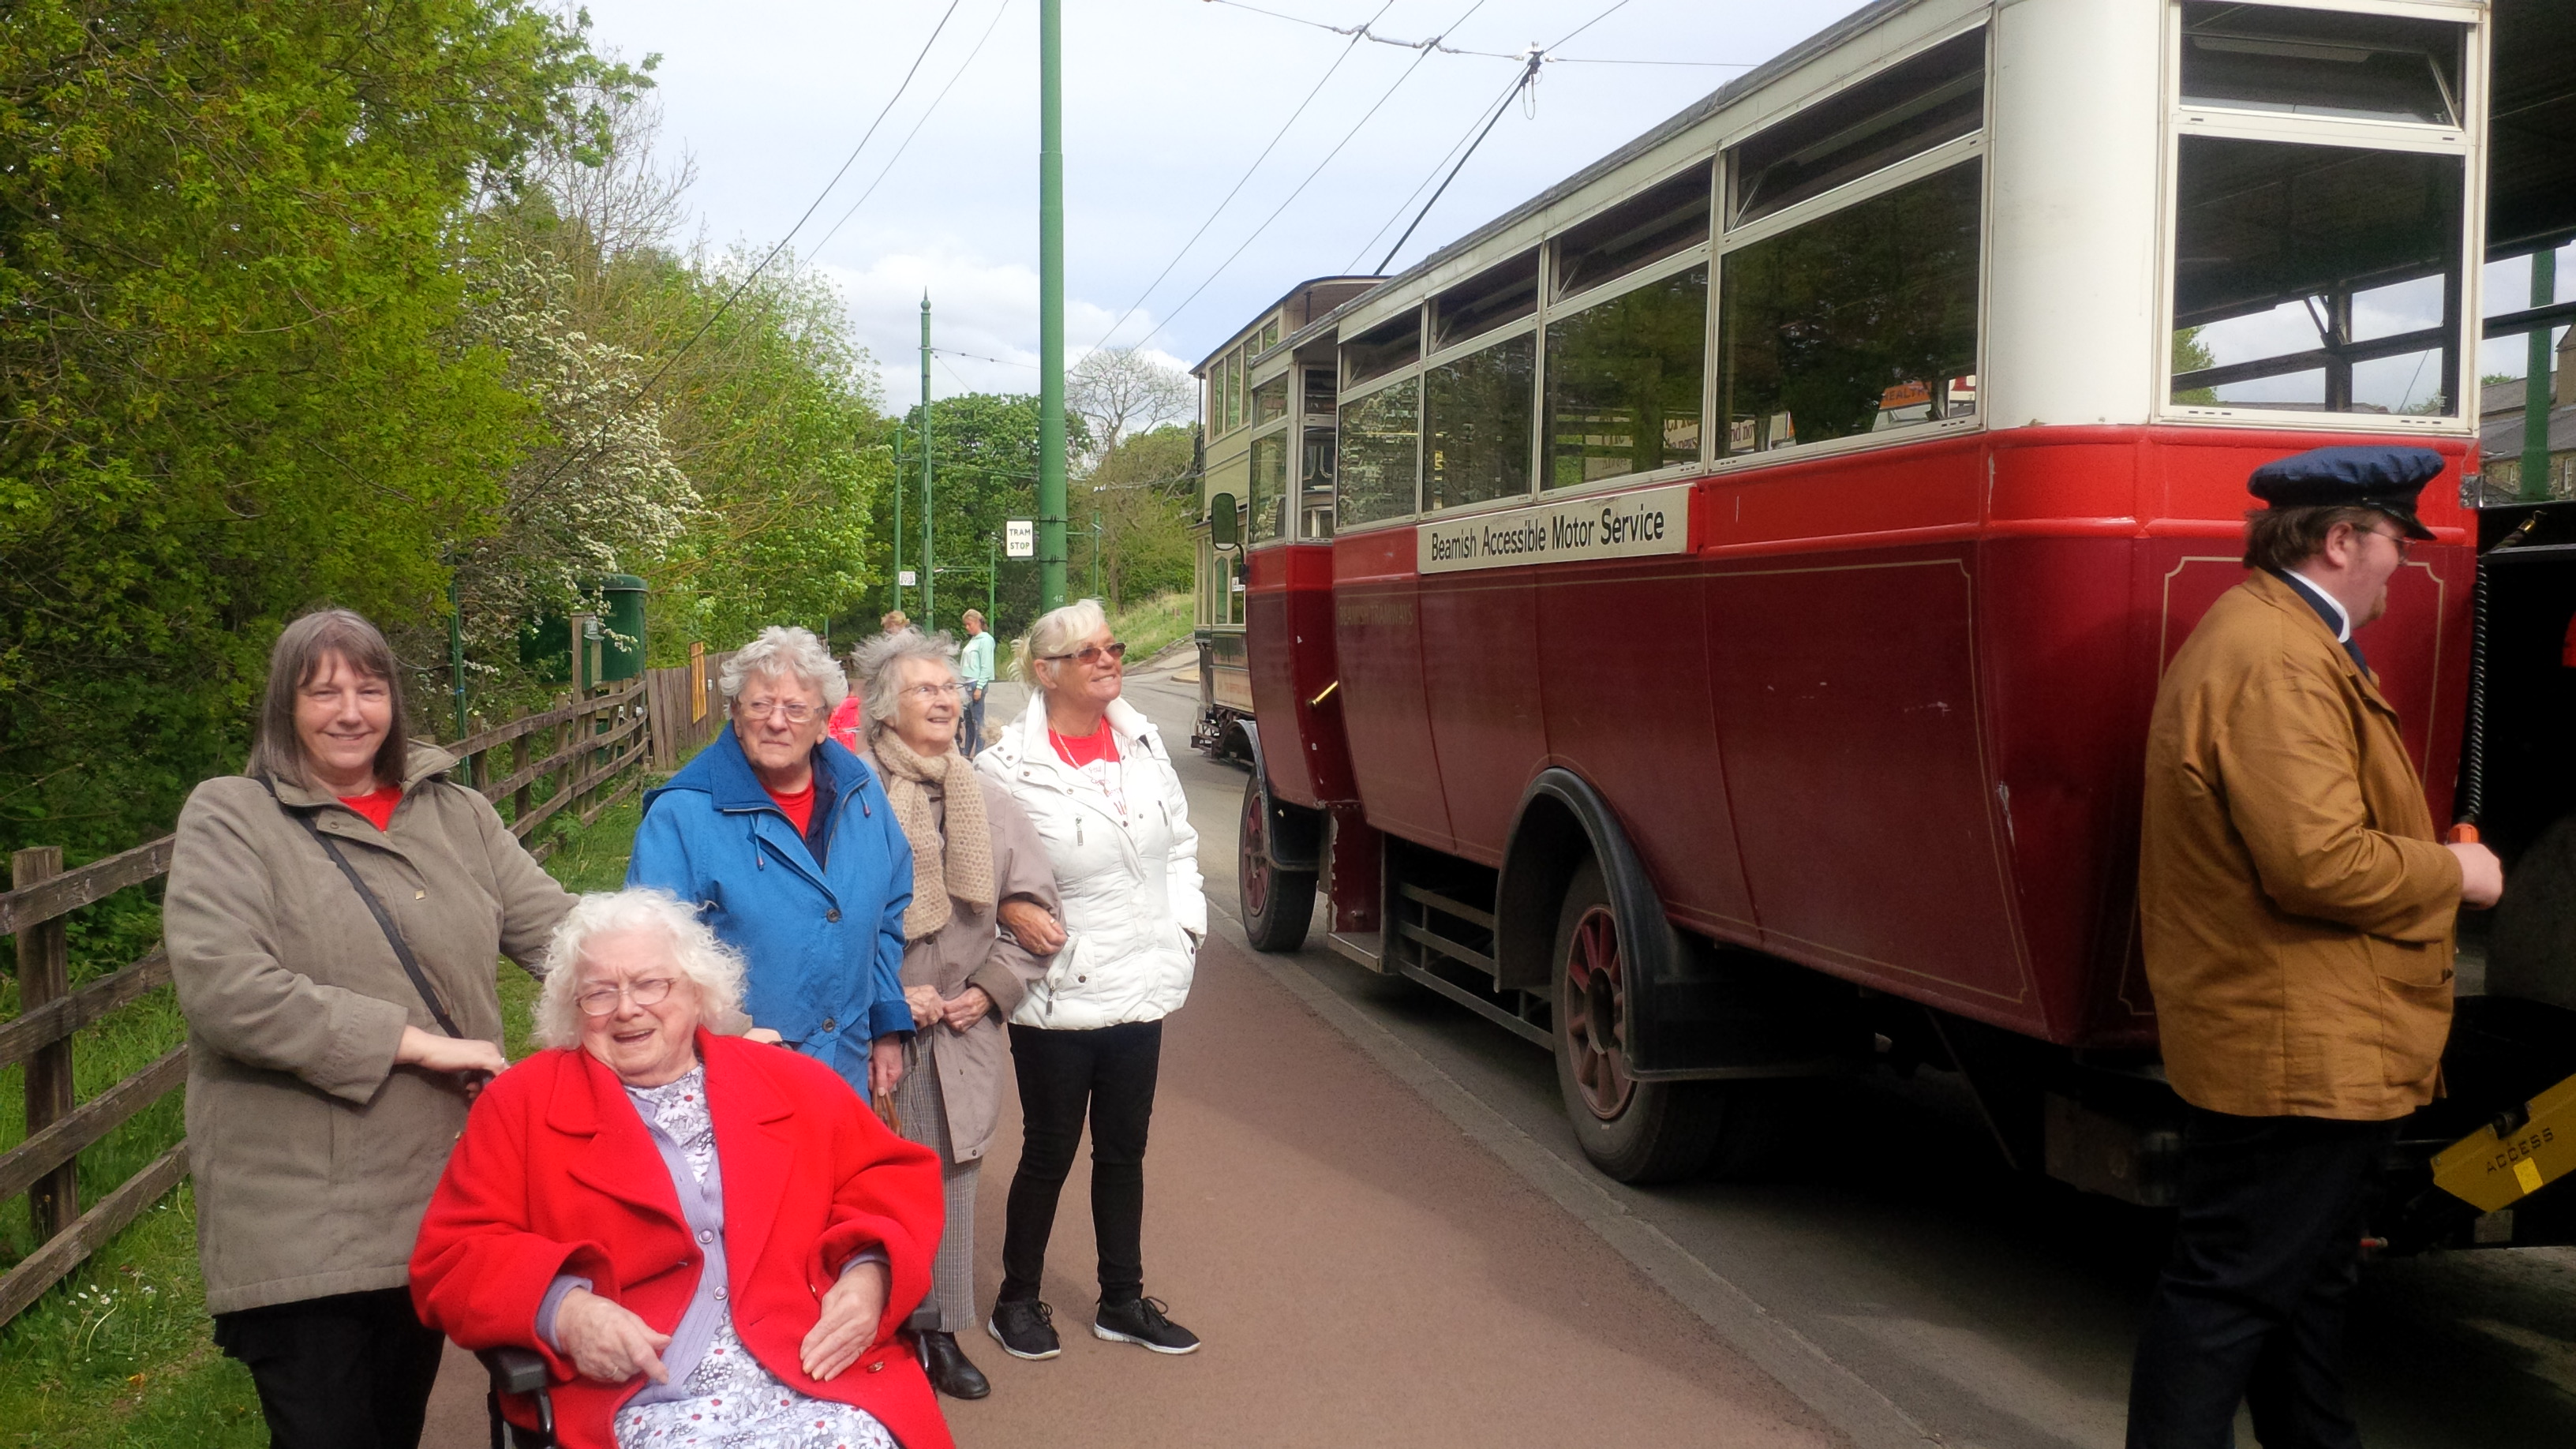 Four Seasons Care Centre Trip to Beamish: Key Healthcare is dedicated to caring for elderly residents in safe. We have multiple dementia care homes including our care home middlesbrough, our care home St. Helen and care home saltburn. We excel in monitoring and improving care levels.